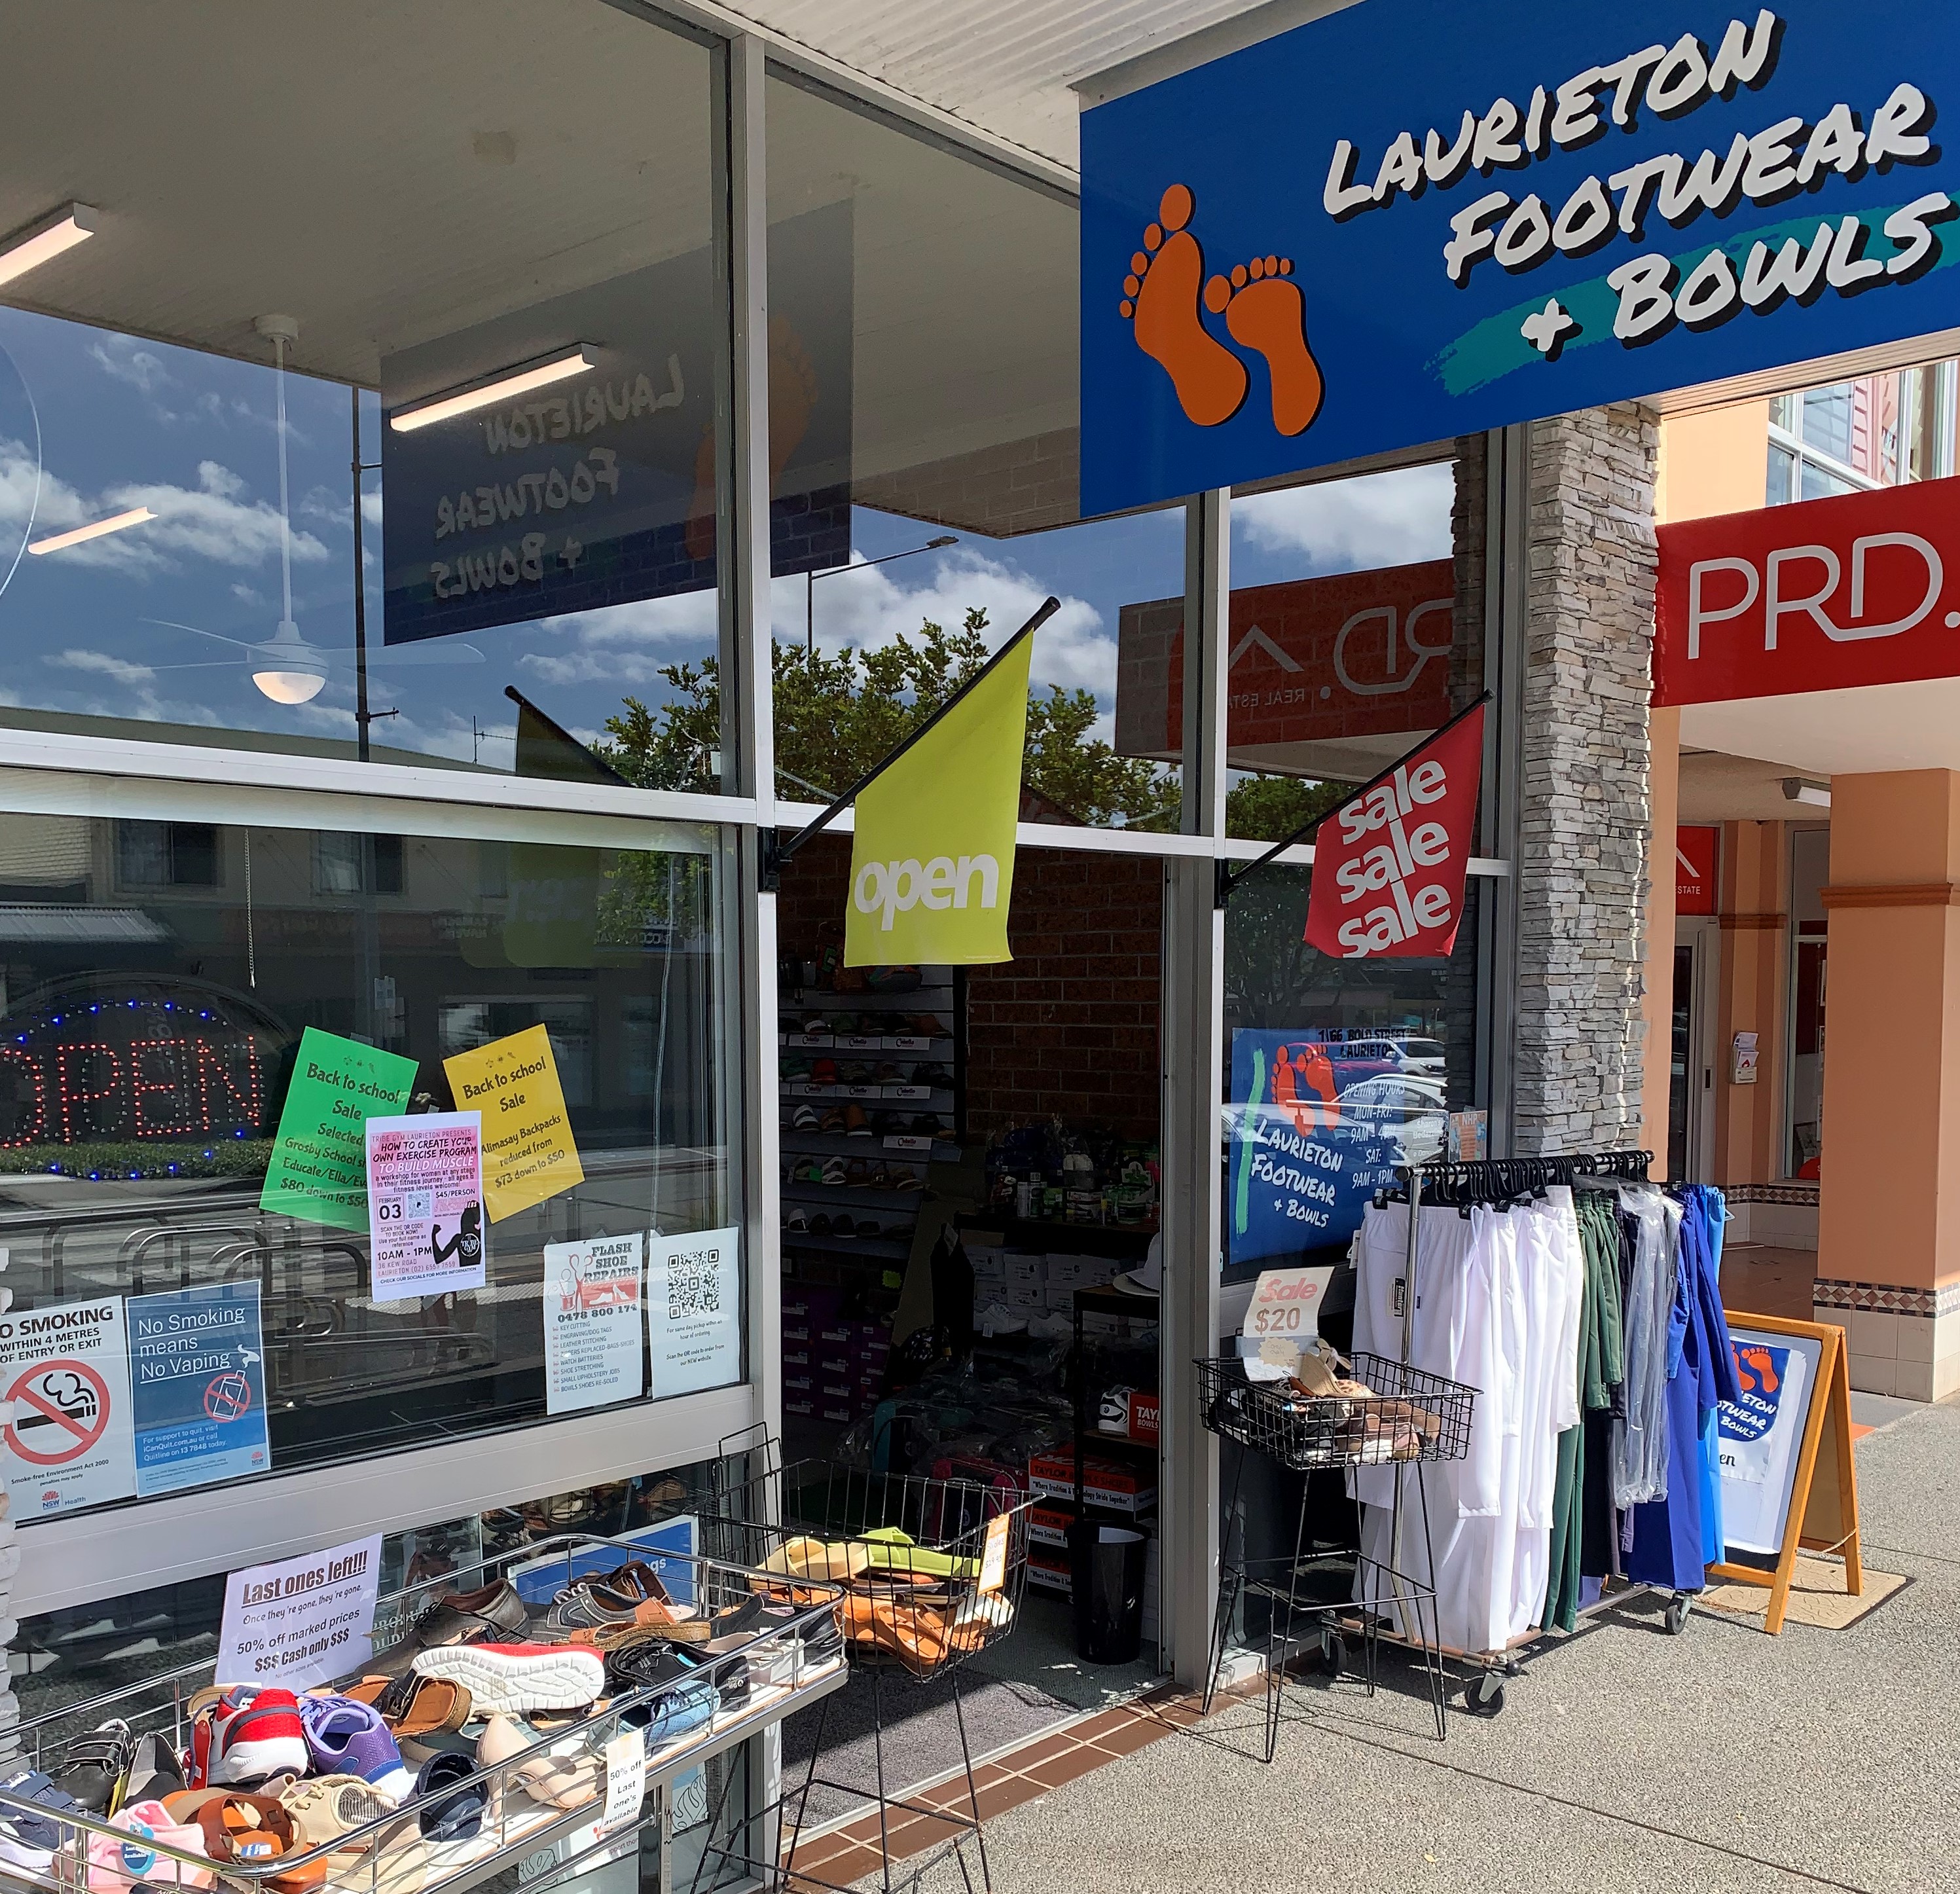 Laurieton Footwear and Bowls